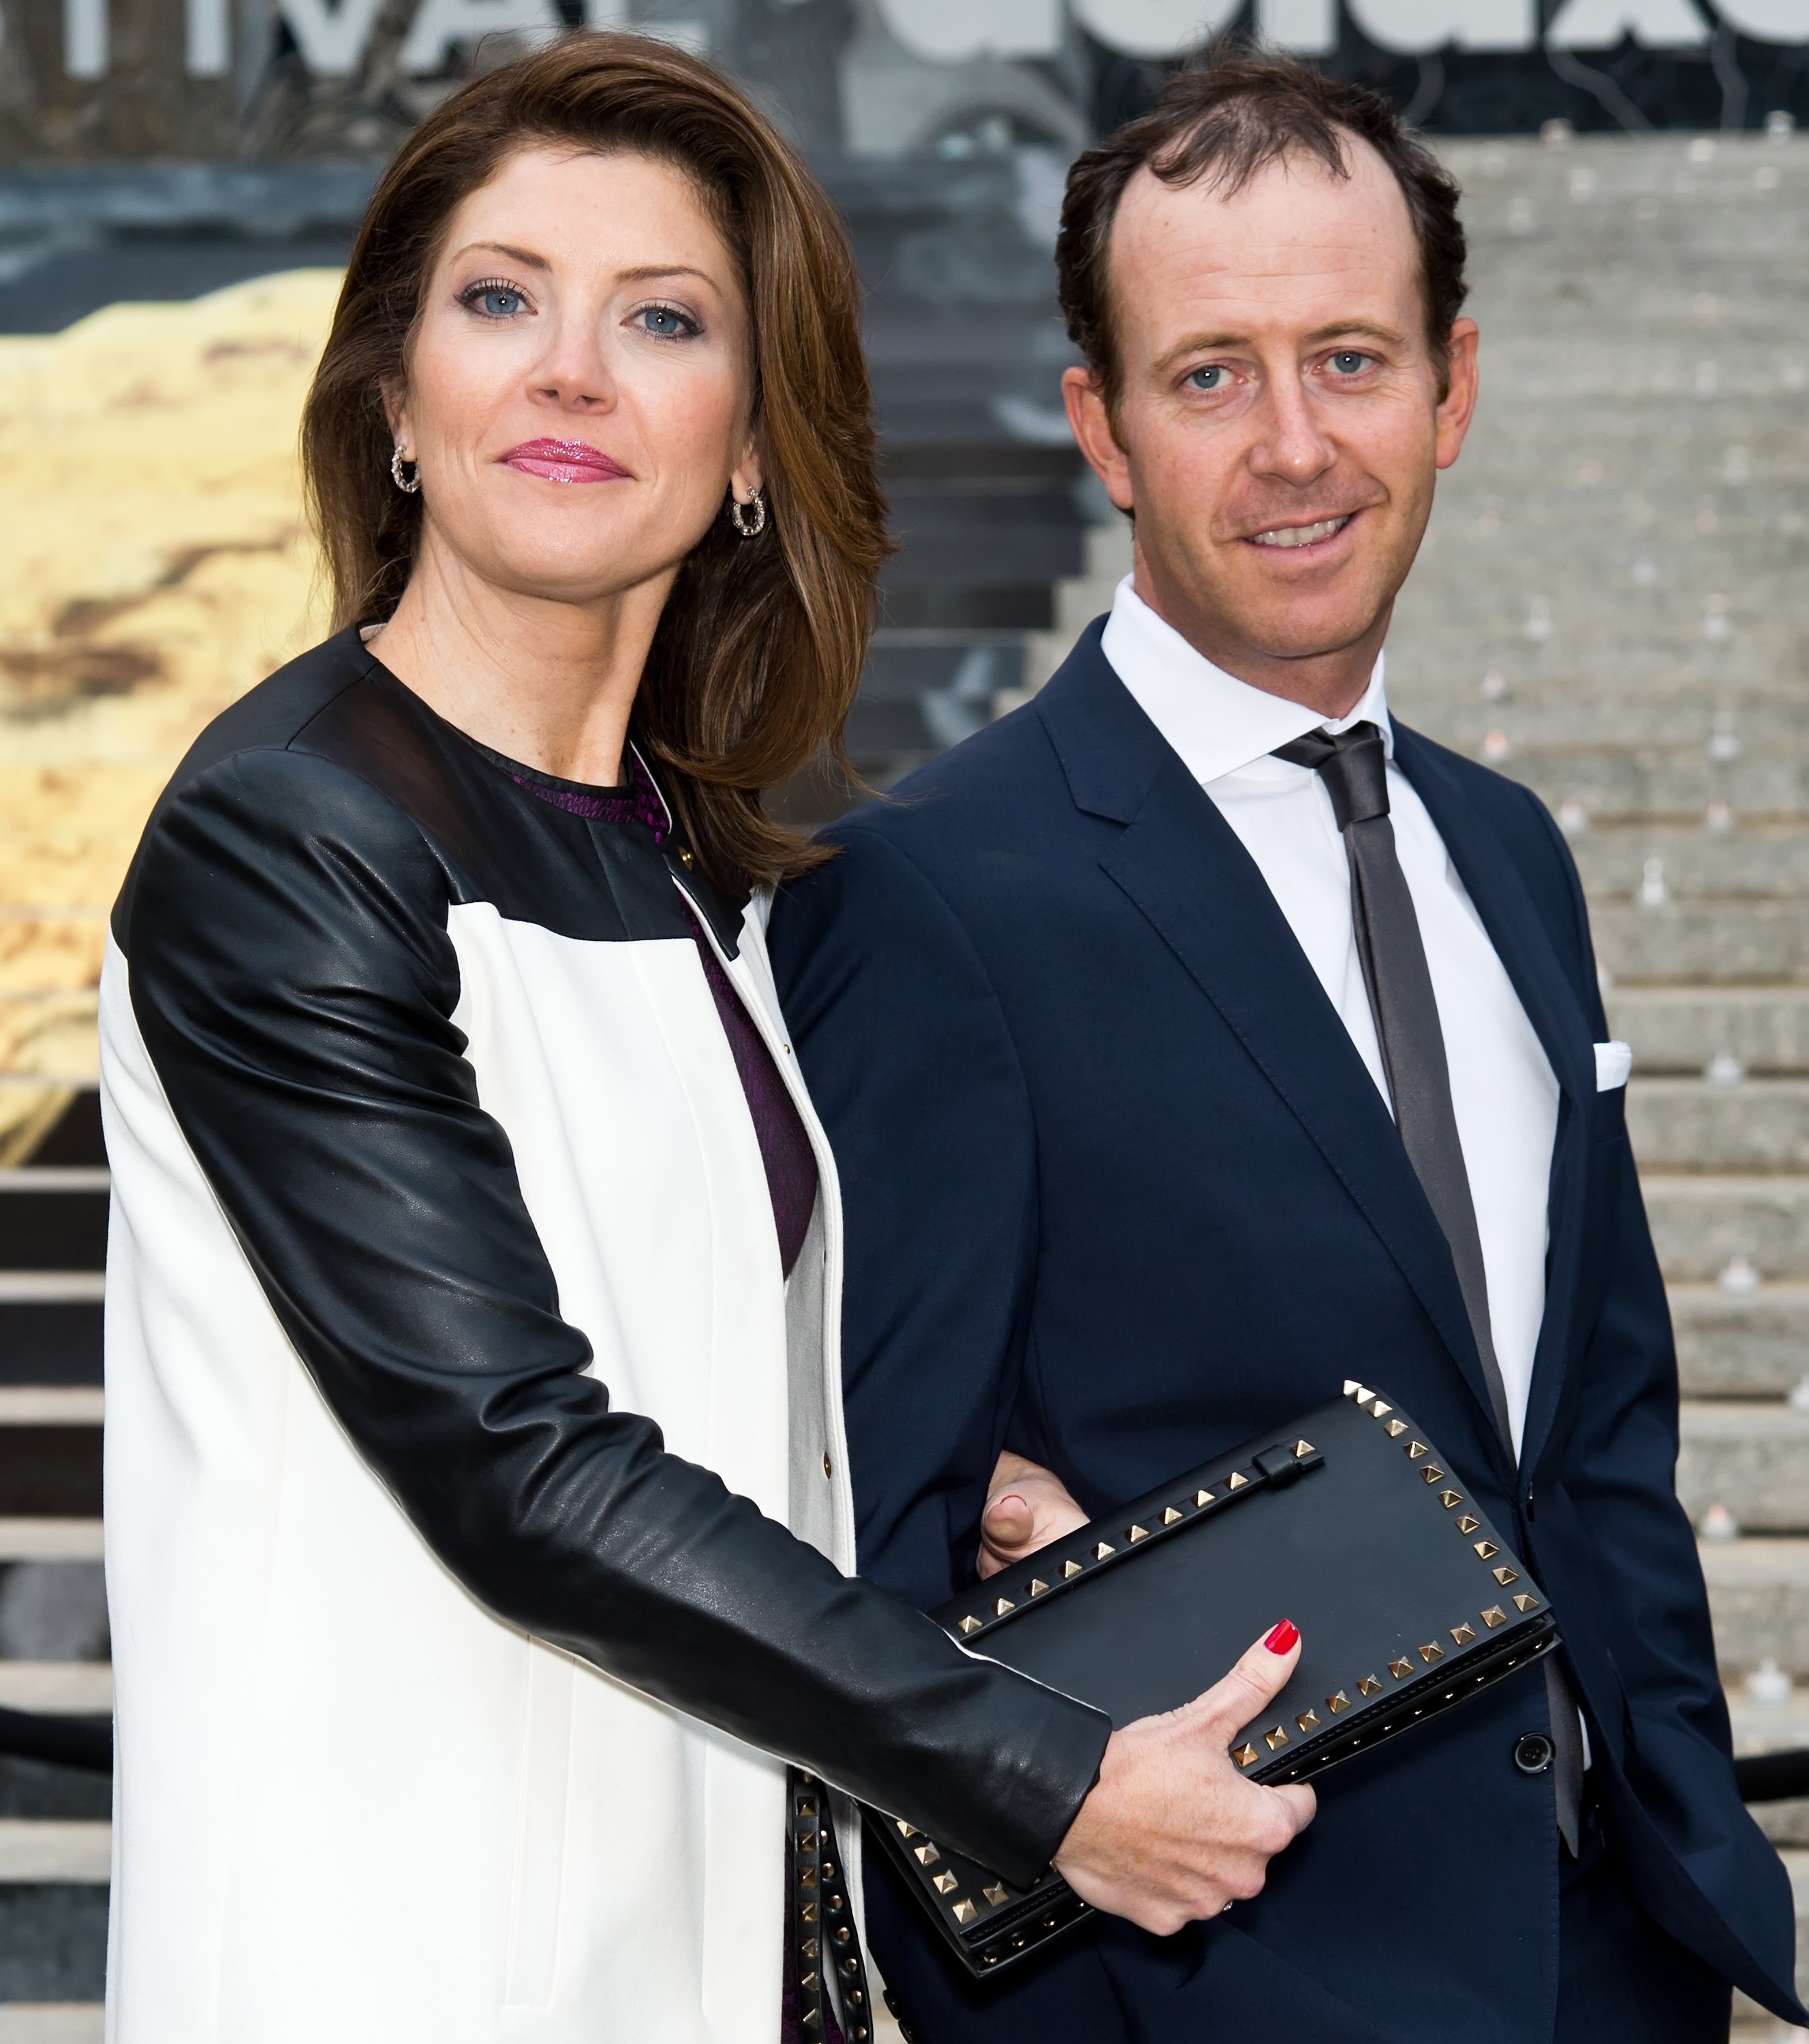 Journalist Norah O'Donnell and Geoff Tracy attend the Vanity Fair Party during the 2014 Tribeca Film Festival at the State Supreme Courthouse on April 23, 2014 in New York City. | Source: Getty Images